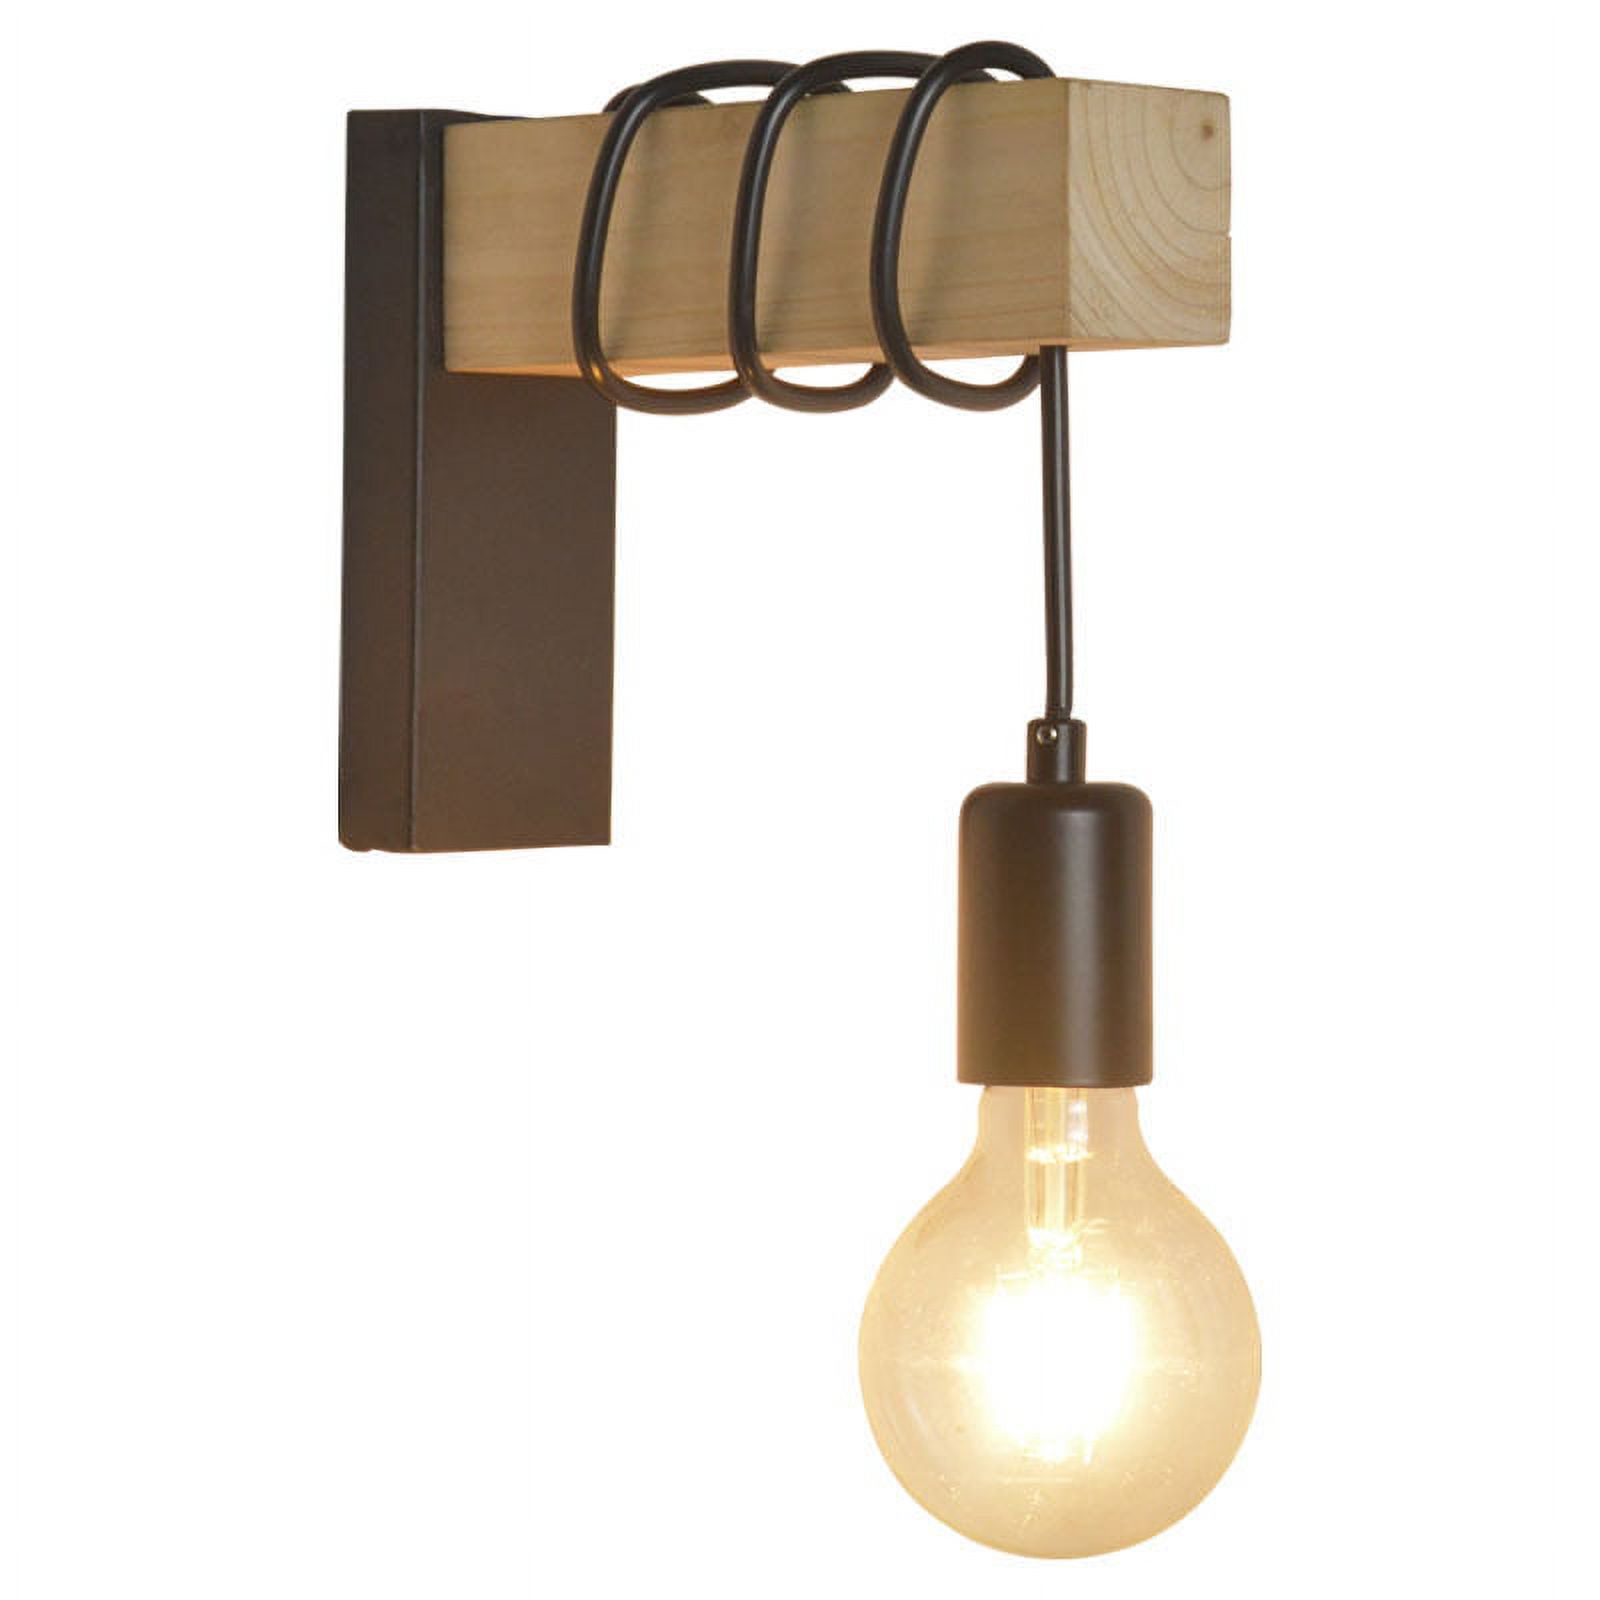 Wall Lamp, Vintage Industrial Design Flame Wall Lamp, Steel And Wood Retro Lamp,socket: E27without Bulb - image 2 of 2